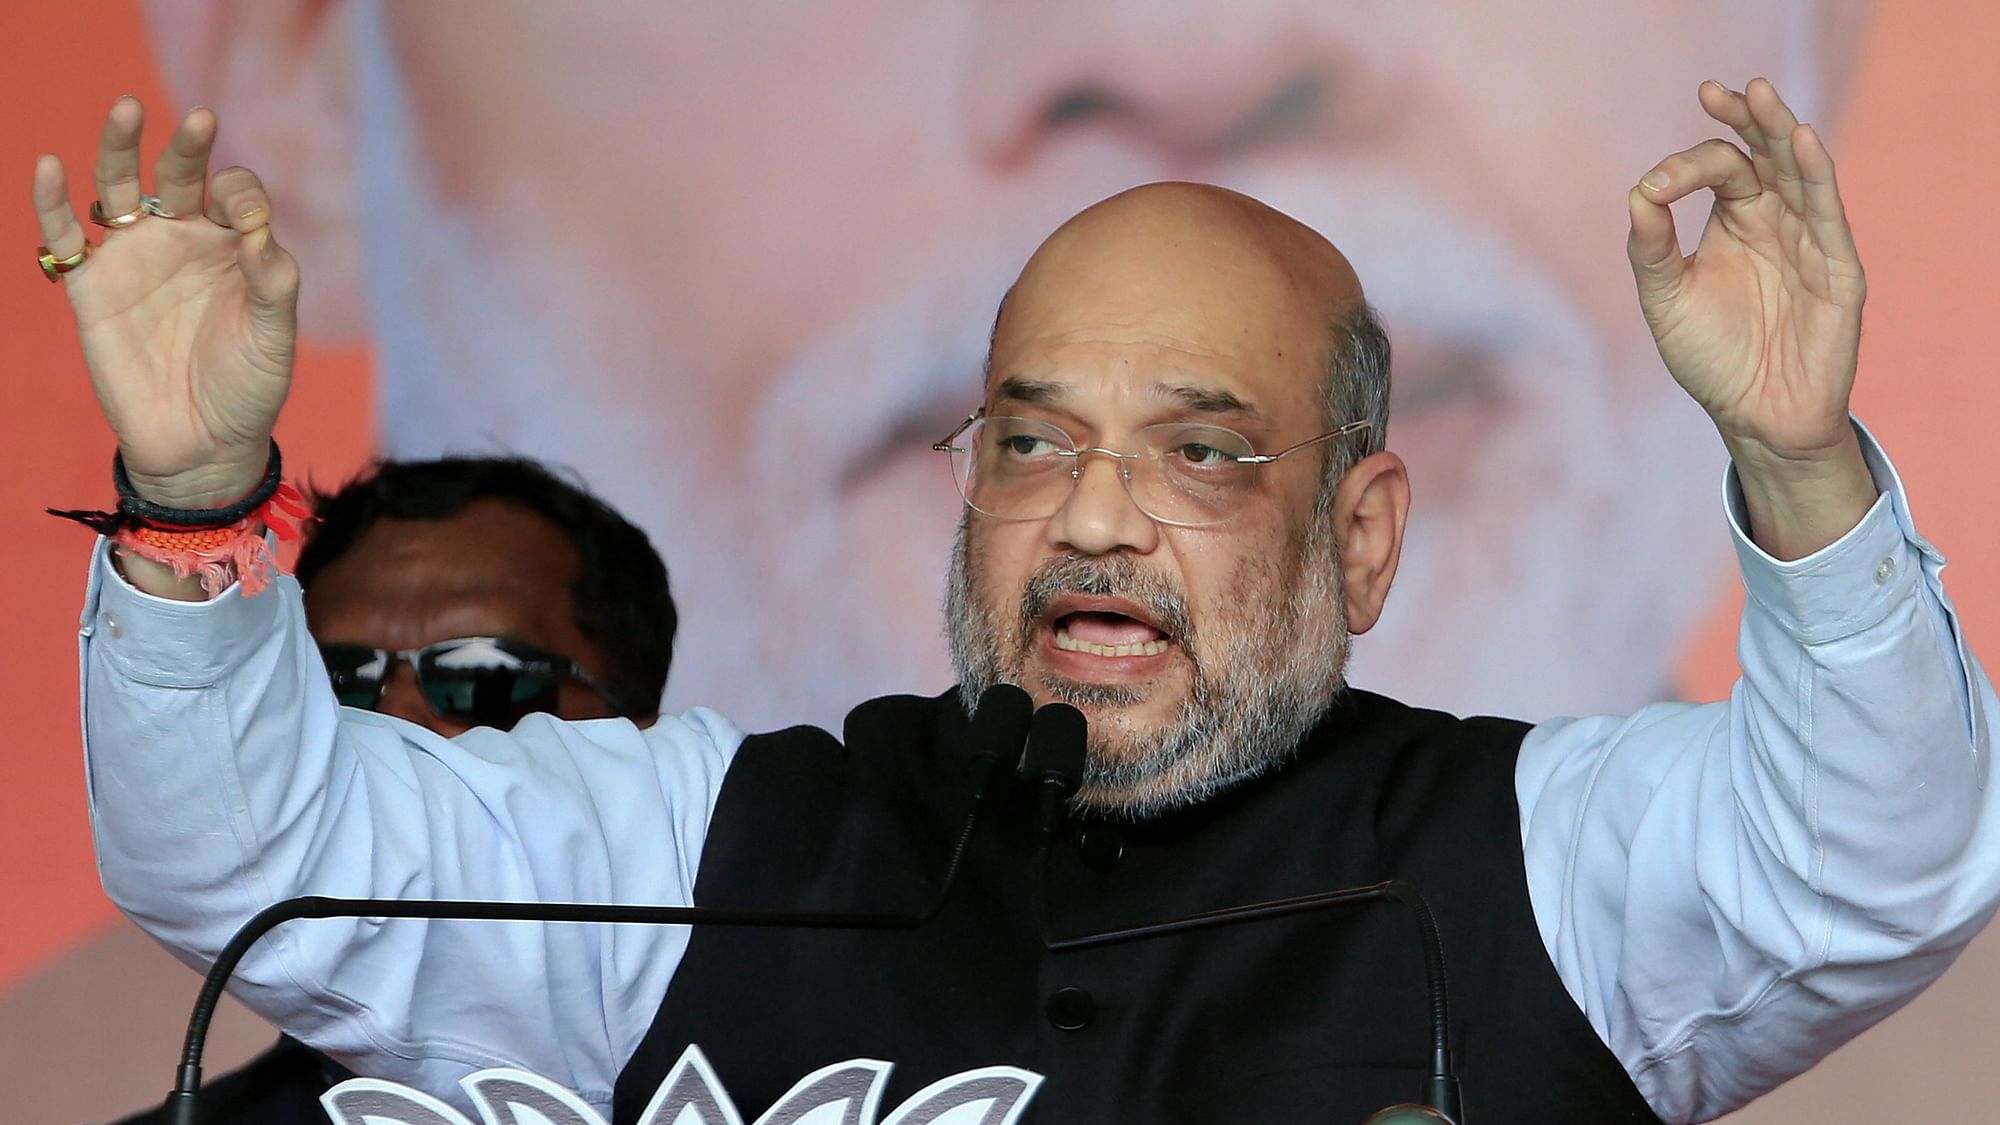 Amit Shah said that there is no provision in the Act CAA that “takes away anyone’s citizenship”.